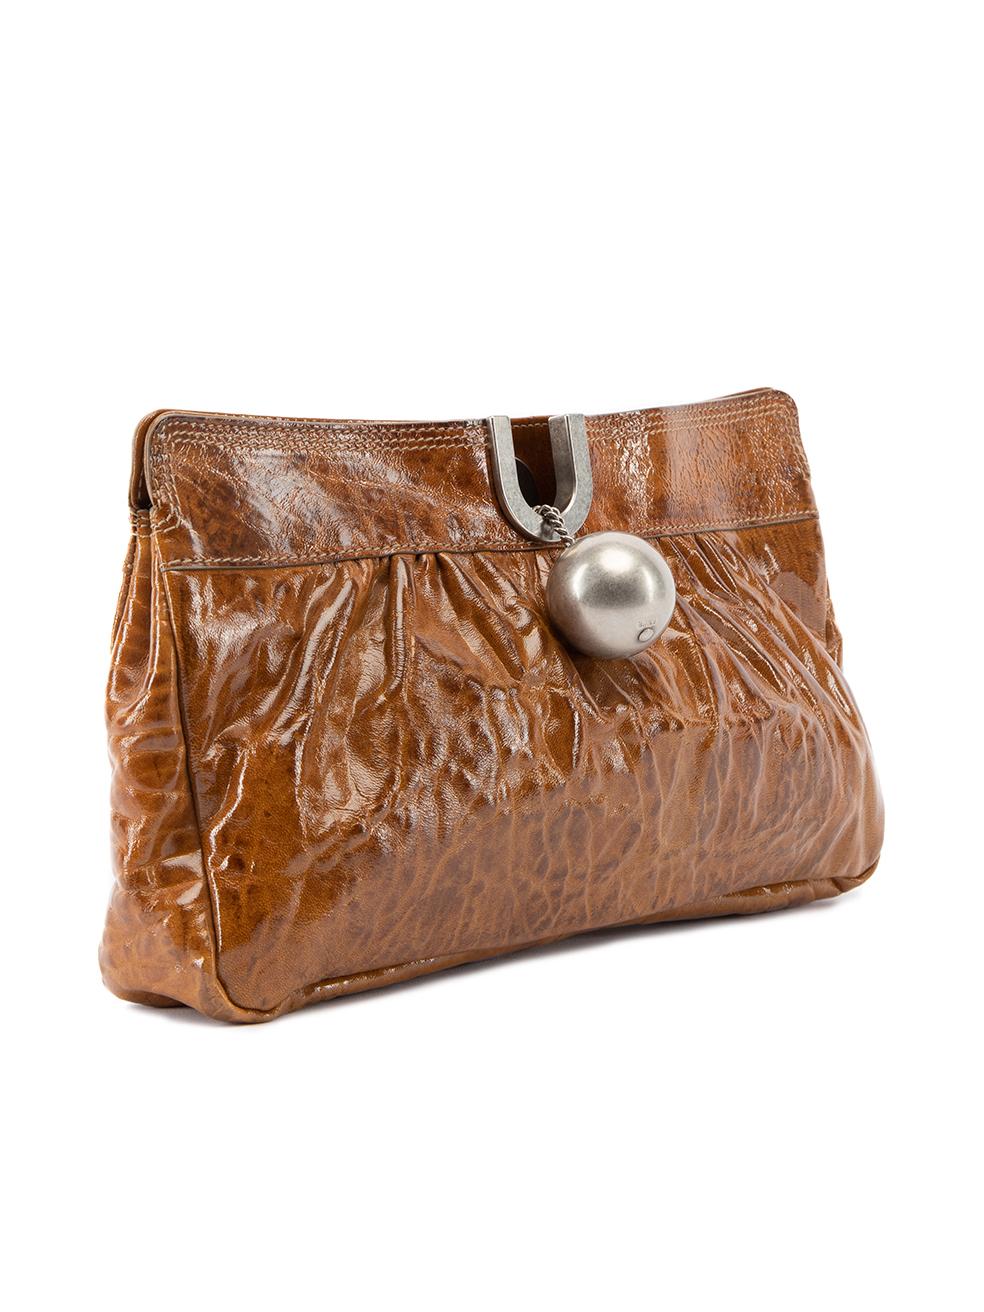 CONDITION is Very good. Minimal wear to clutch is evident. Minimal wear to silver ball clasp on this used Chloe designer resale item.   Details  Brown Patent leather Medium clutch Wrinkled design Silver tone hardware Ball clasp with magnetic button